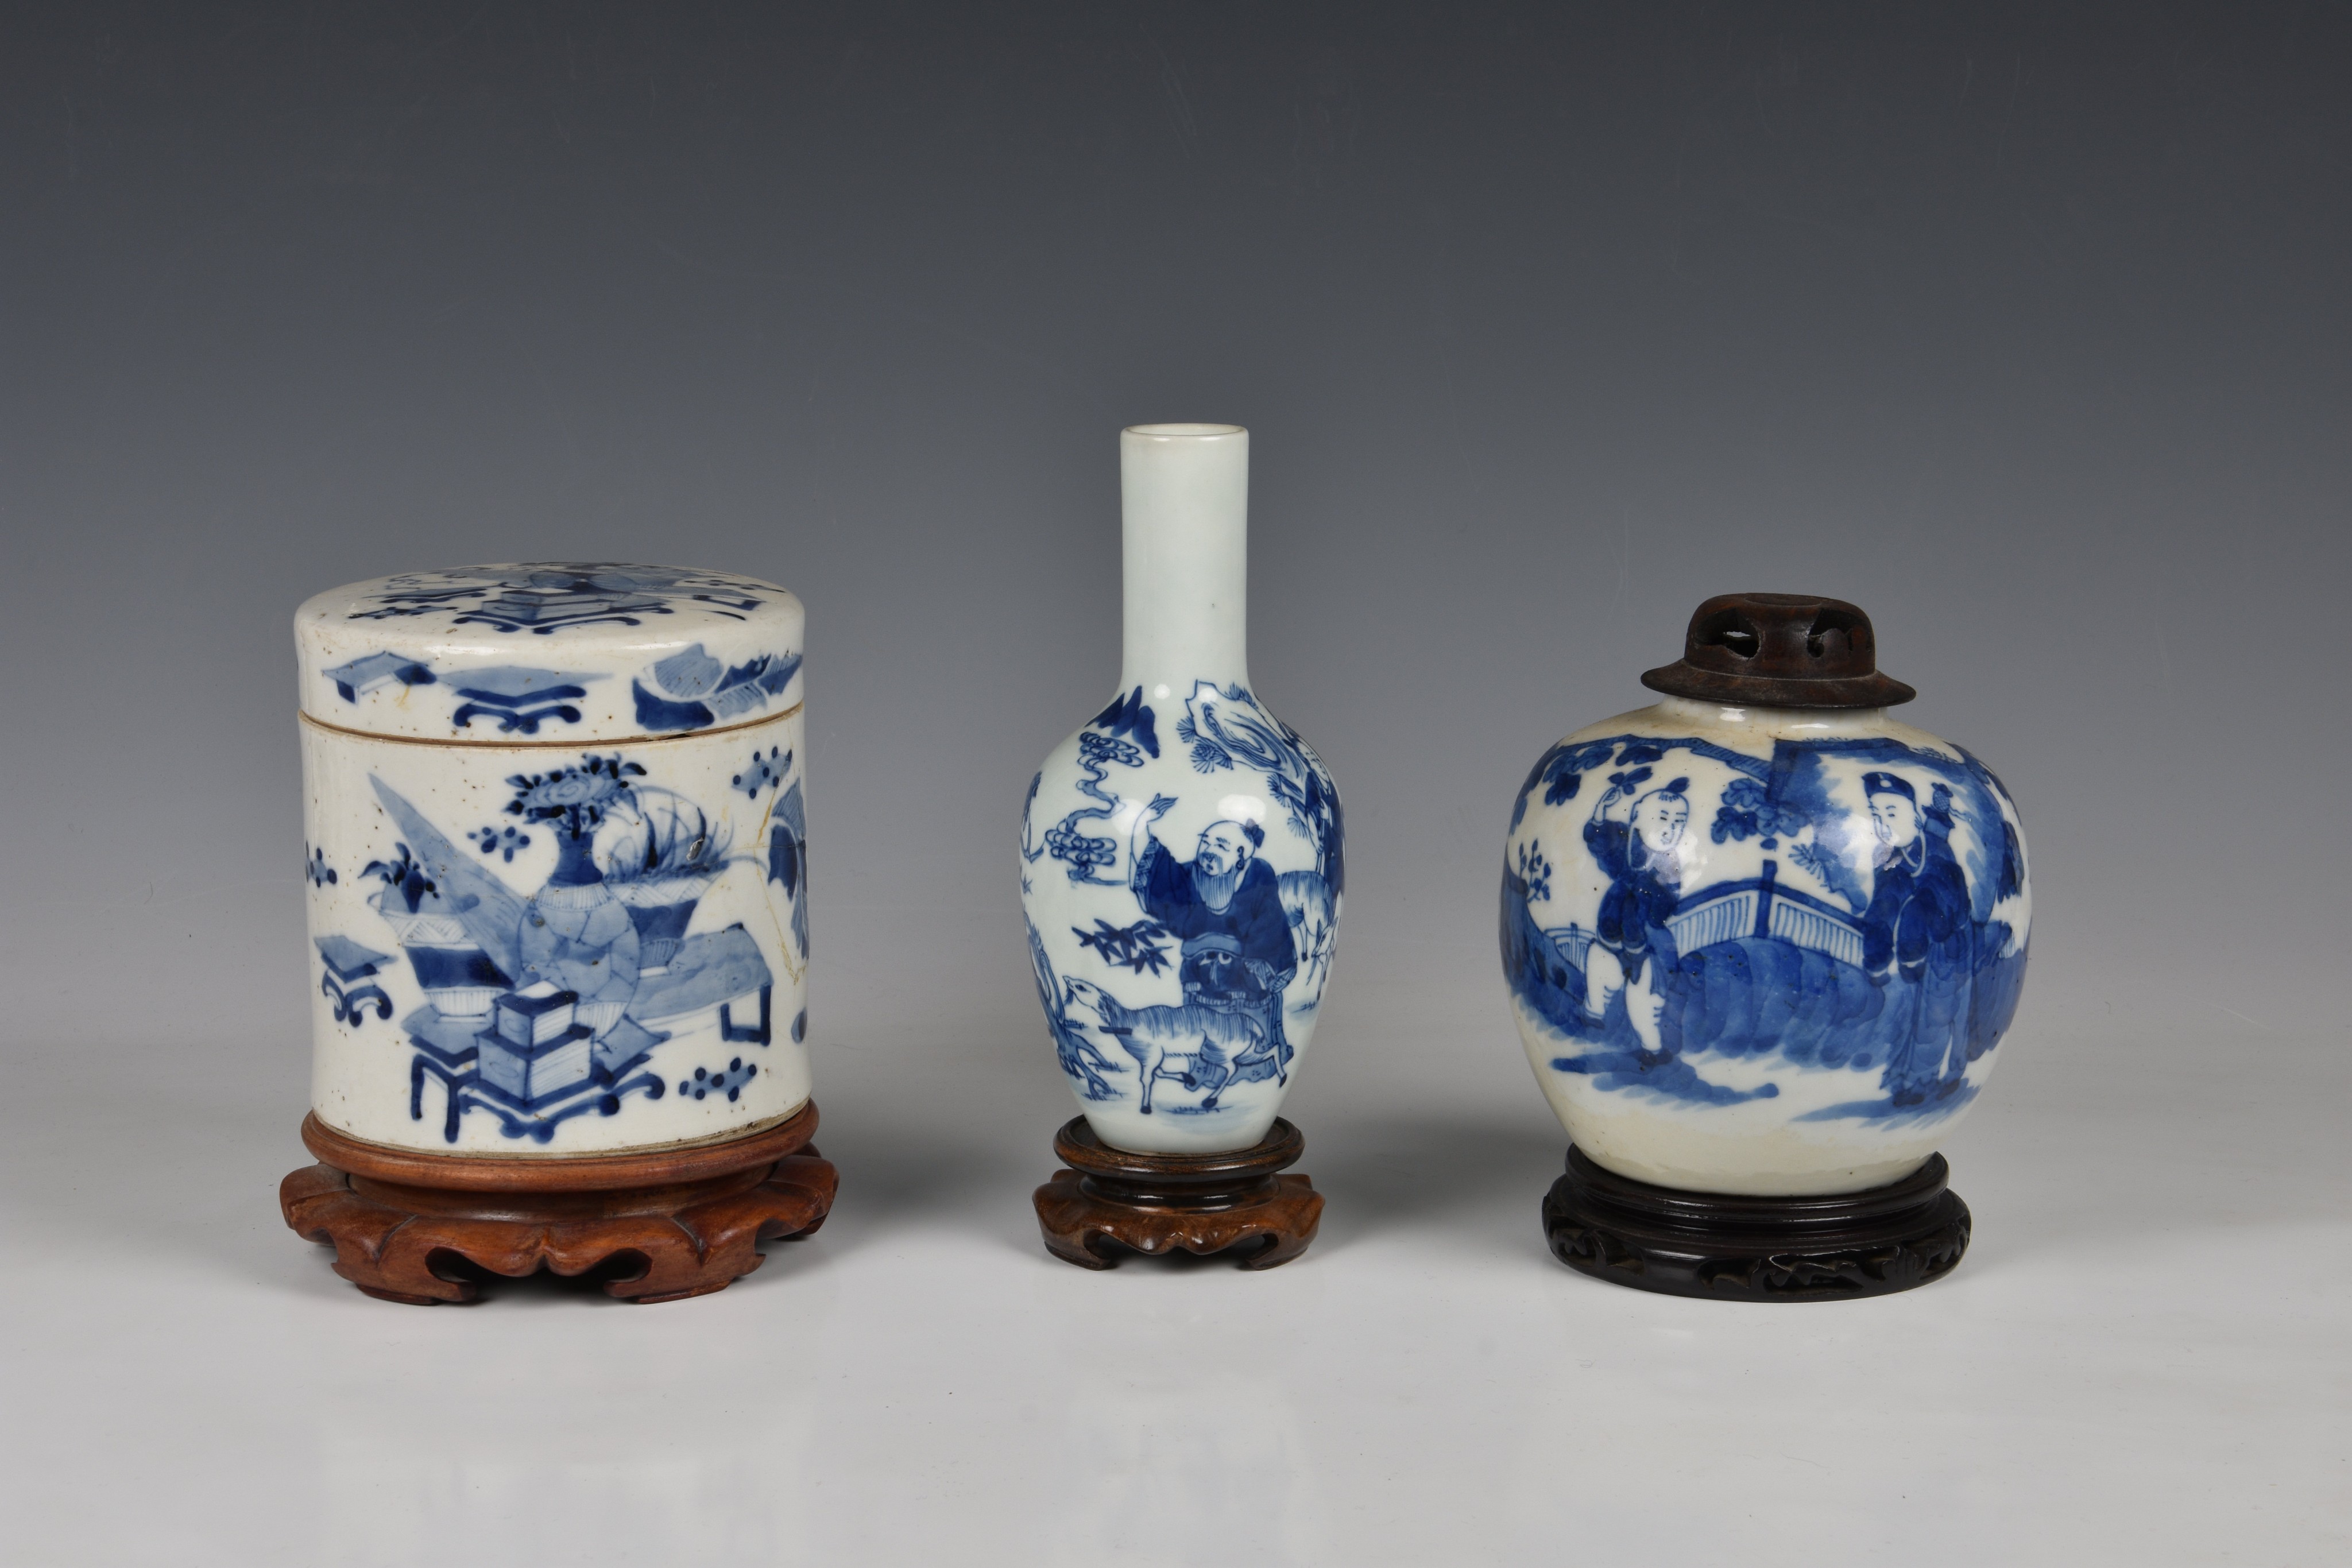 Chinese blue and white porcelain, 20th century, comprising a globular vase with six character Kangxi